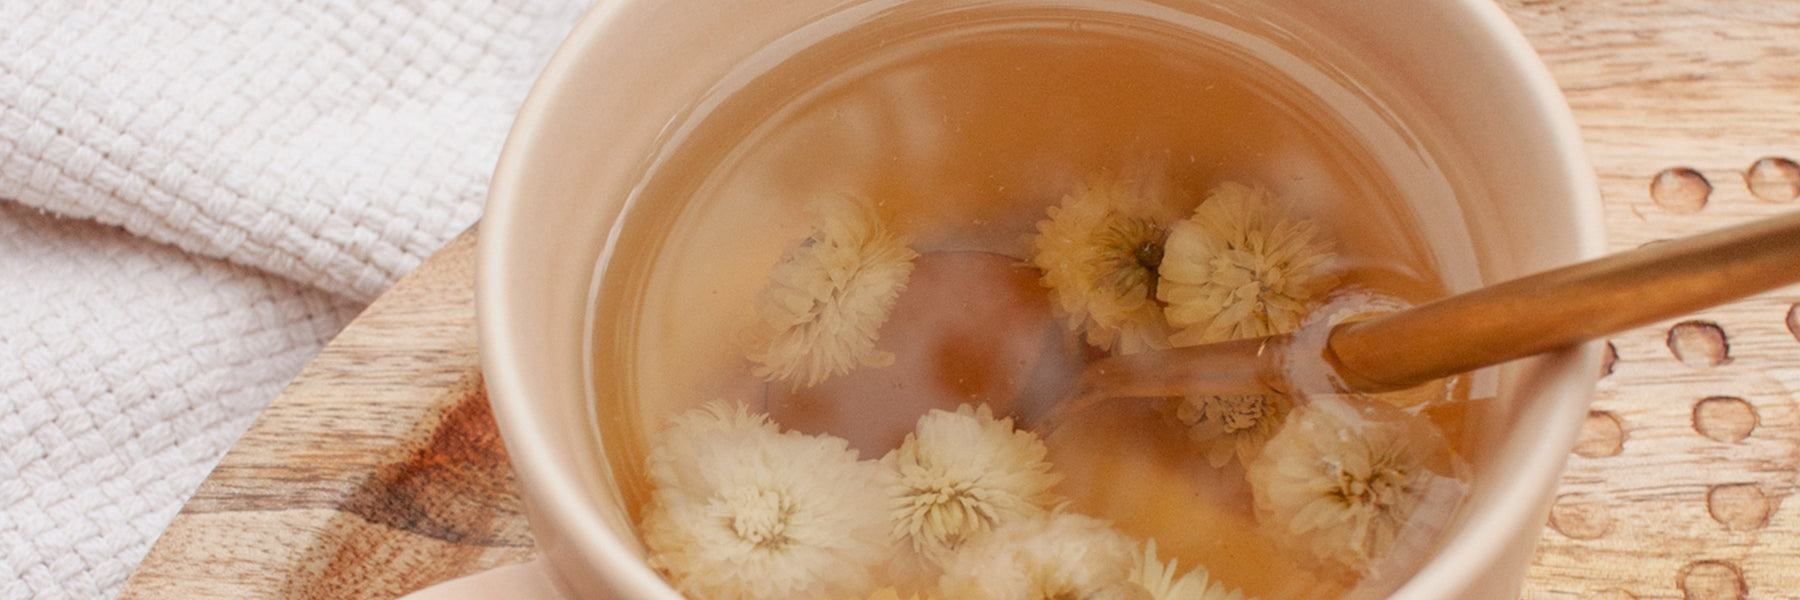 tea infused with camomille flowers